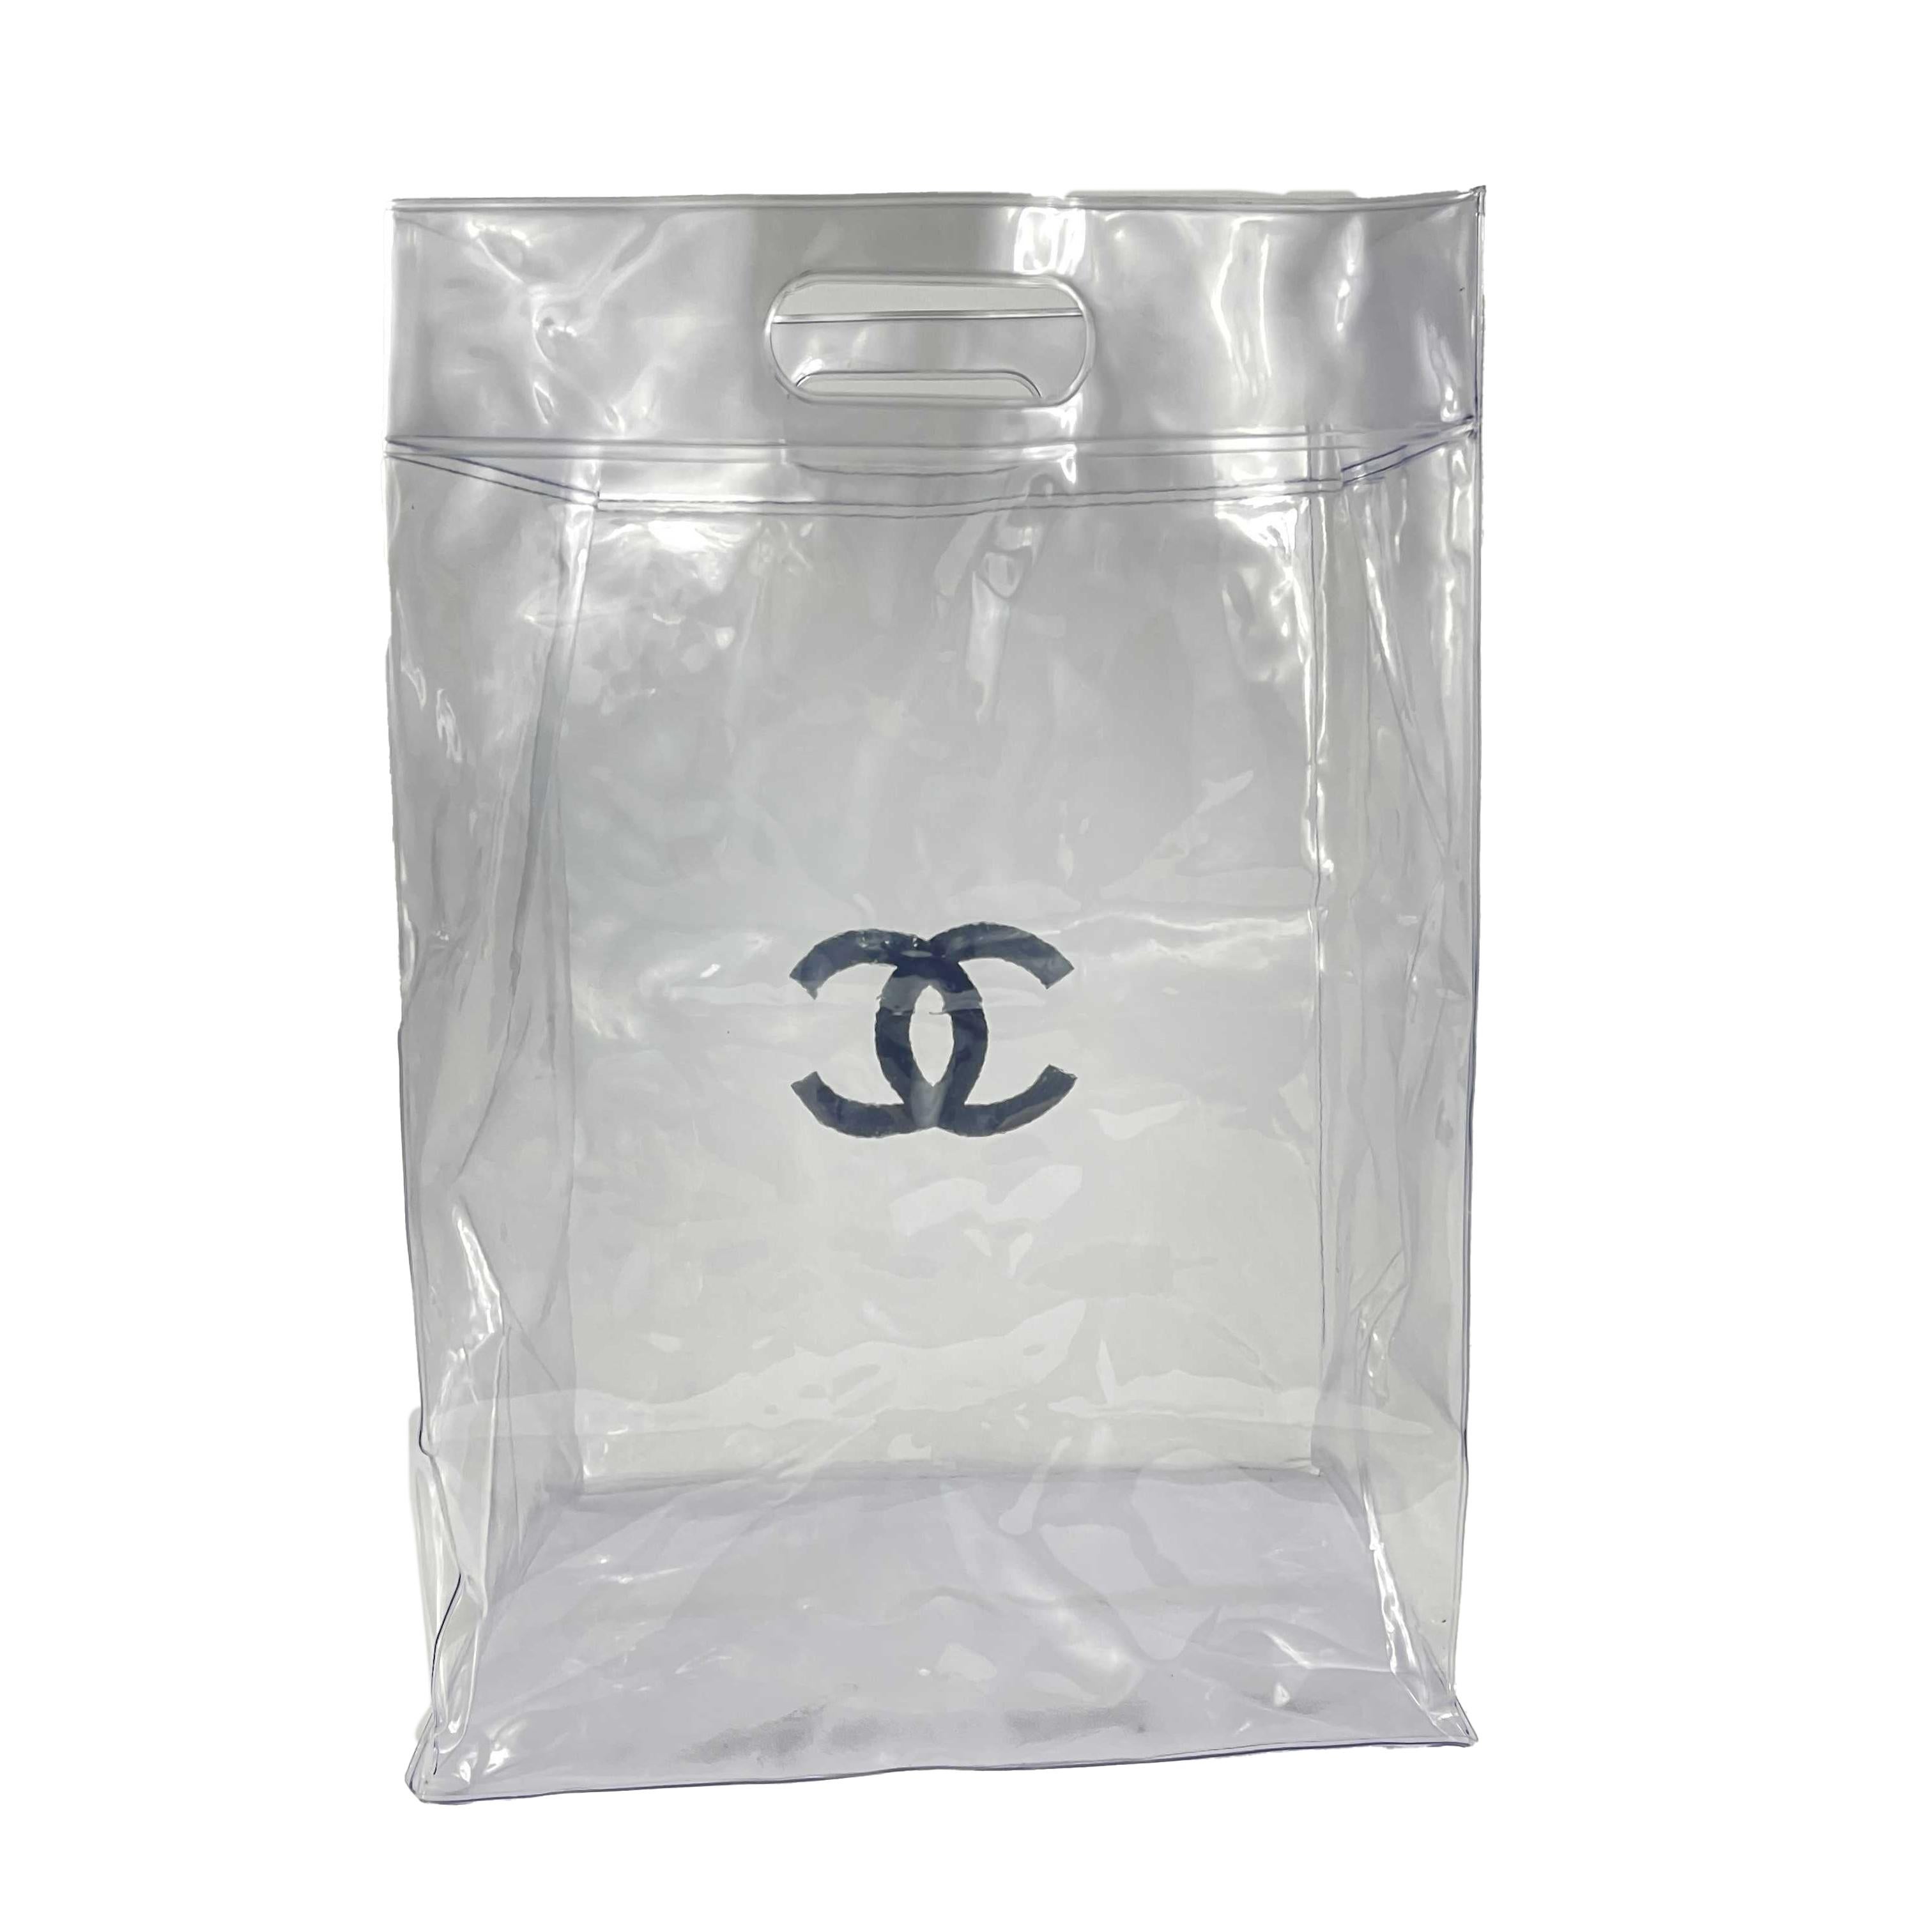 CHANEL - Excellent - *Rare* 2018 VIP Runway Gift Clear PVC CC Tote - Clear, Black - Handbag

Description

This tote bag is a rare gift that was given to VIP attendees of Chanel's 2018 Summer Spring Act 2 Runway Show.
It's crafted with clear PVC and